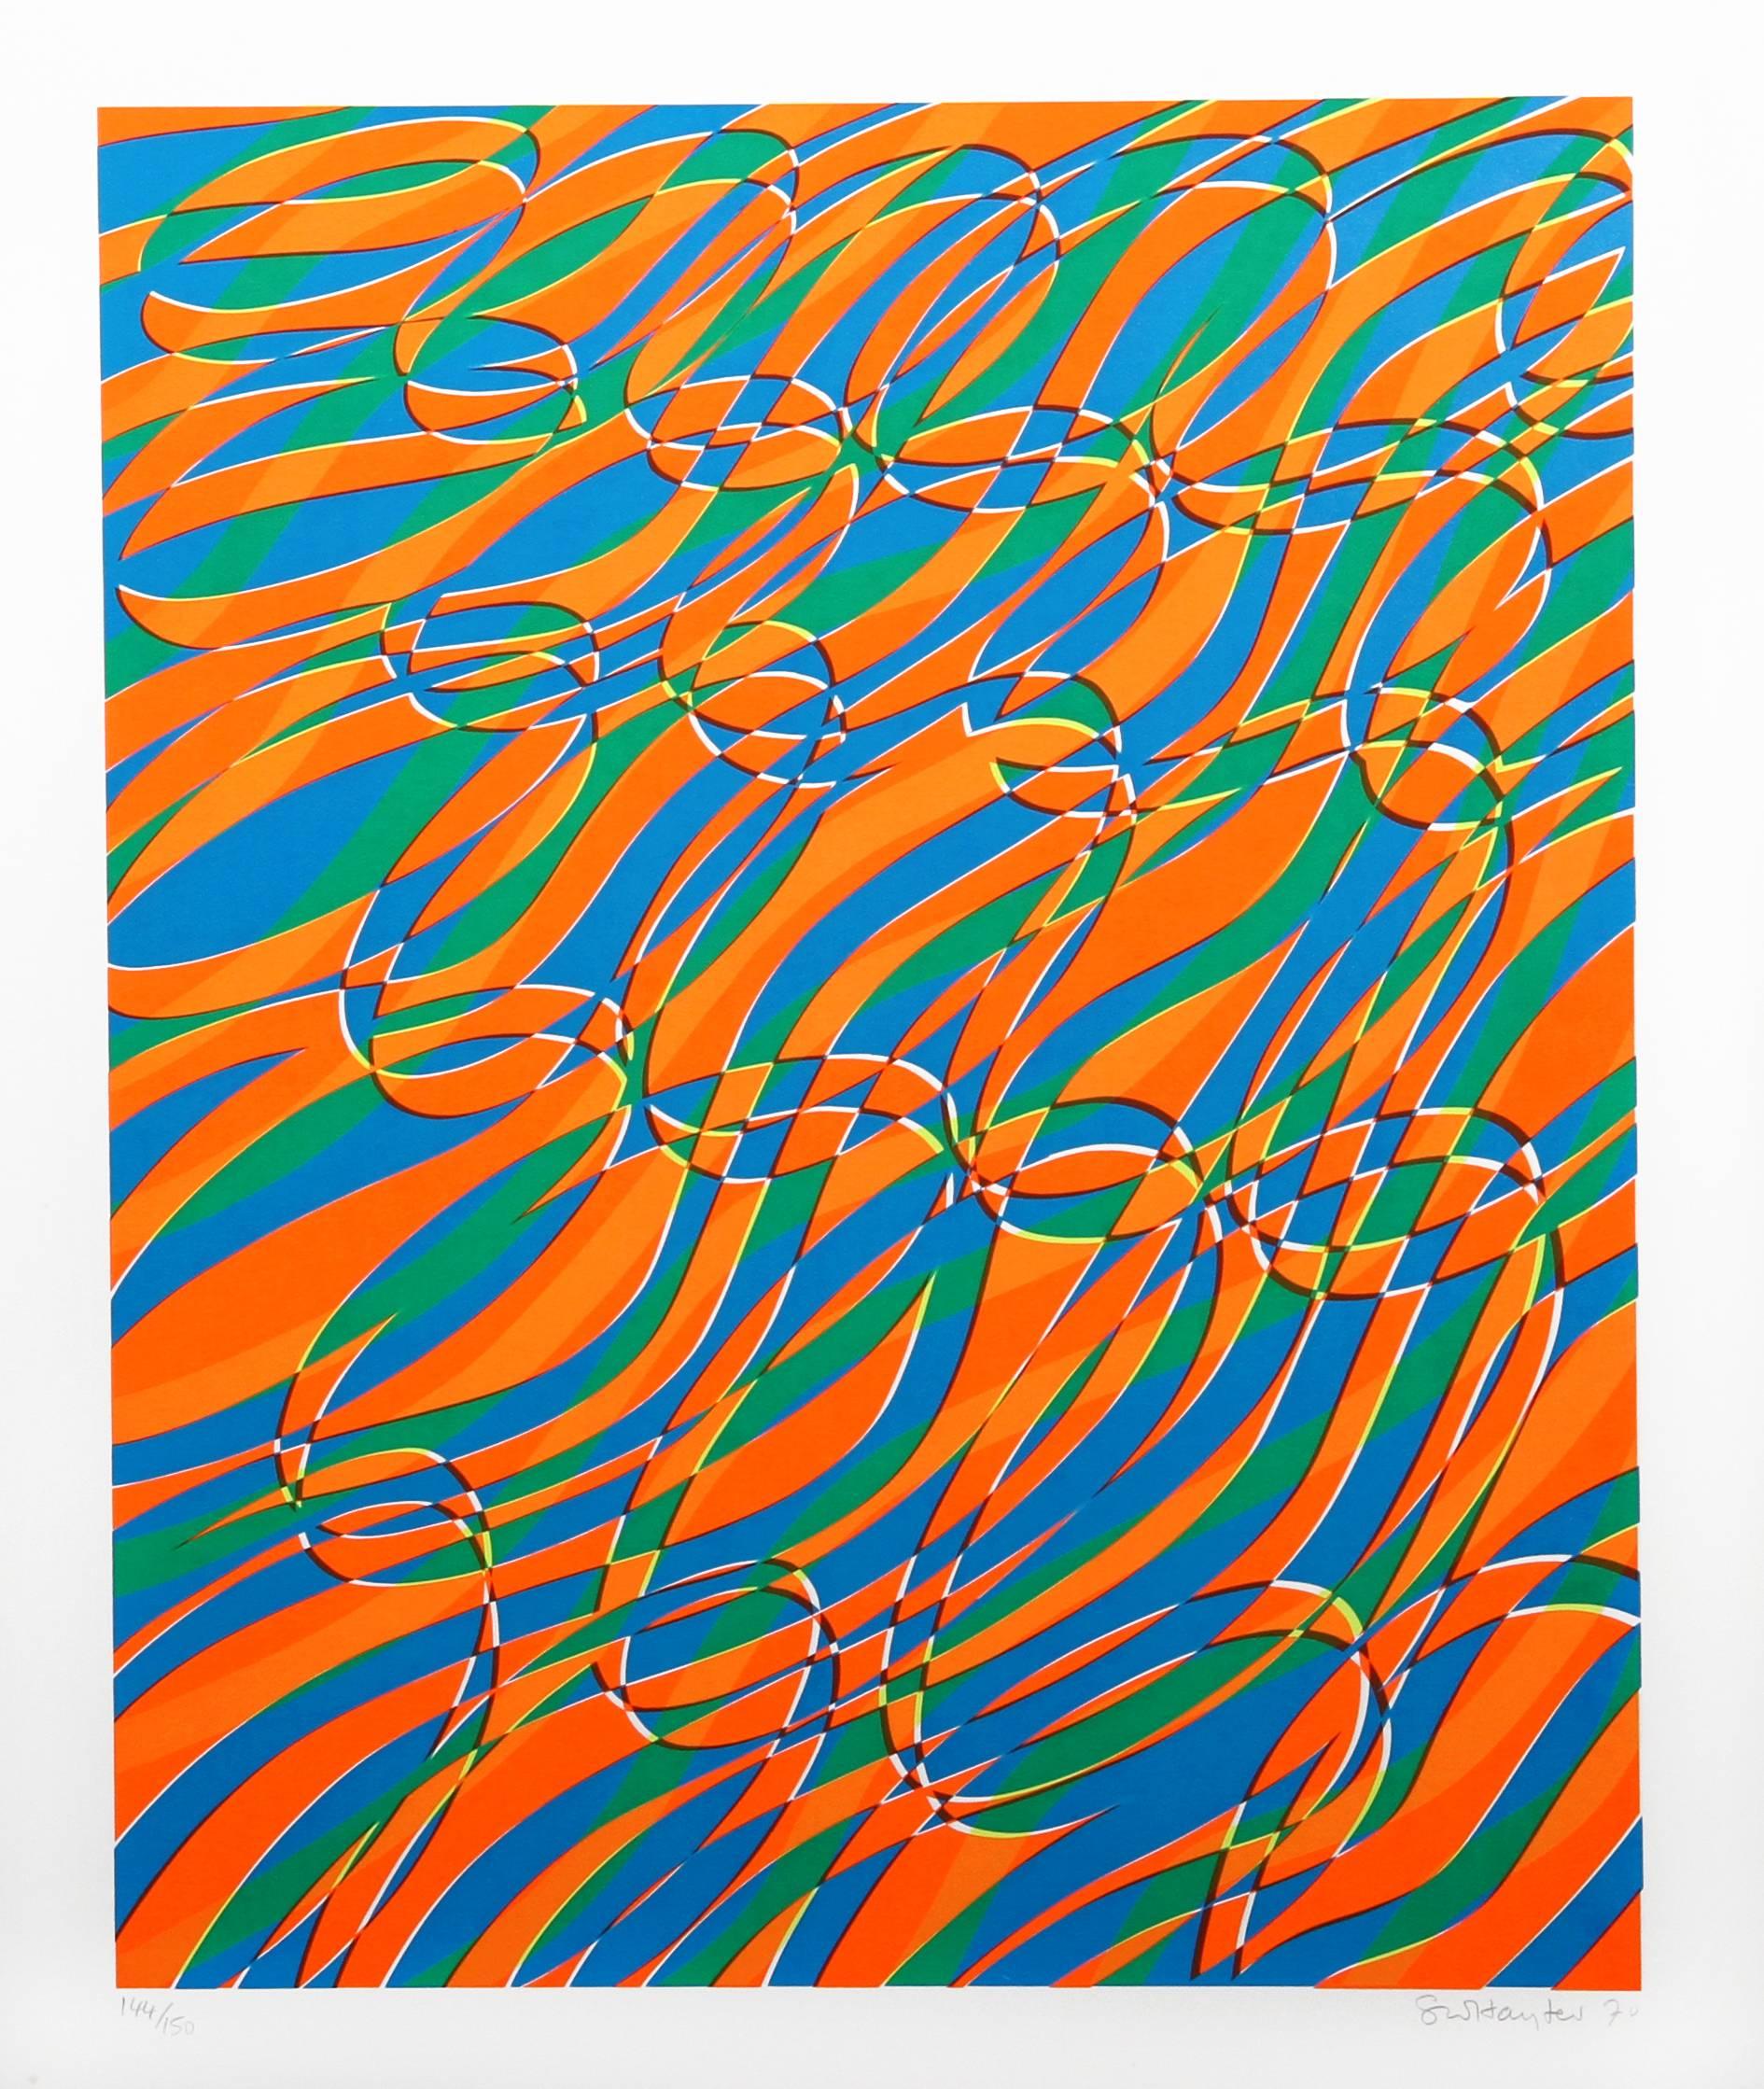 Artist: Stanley Hayter, British (1901 - 1988)
Title: II from the Aquarius Suite
Year: 1970
Medium: Silkscreen, signed and numbered in pencil 
Edition: 150; AP XXX 
Paper Size: 27 x 23 inches 